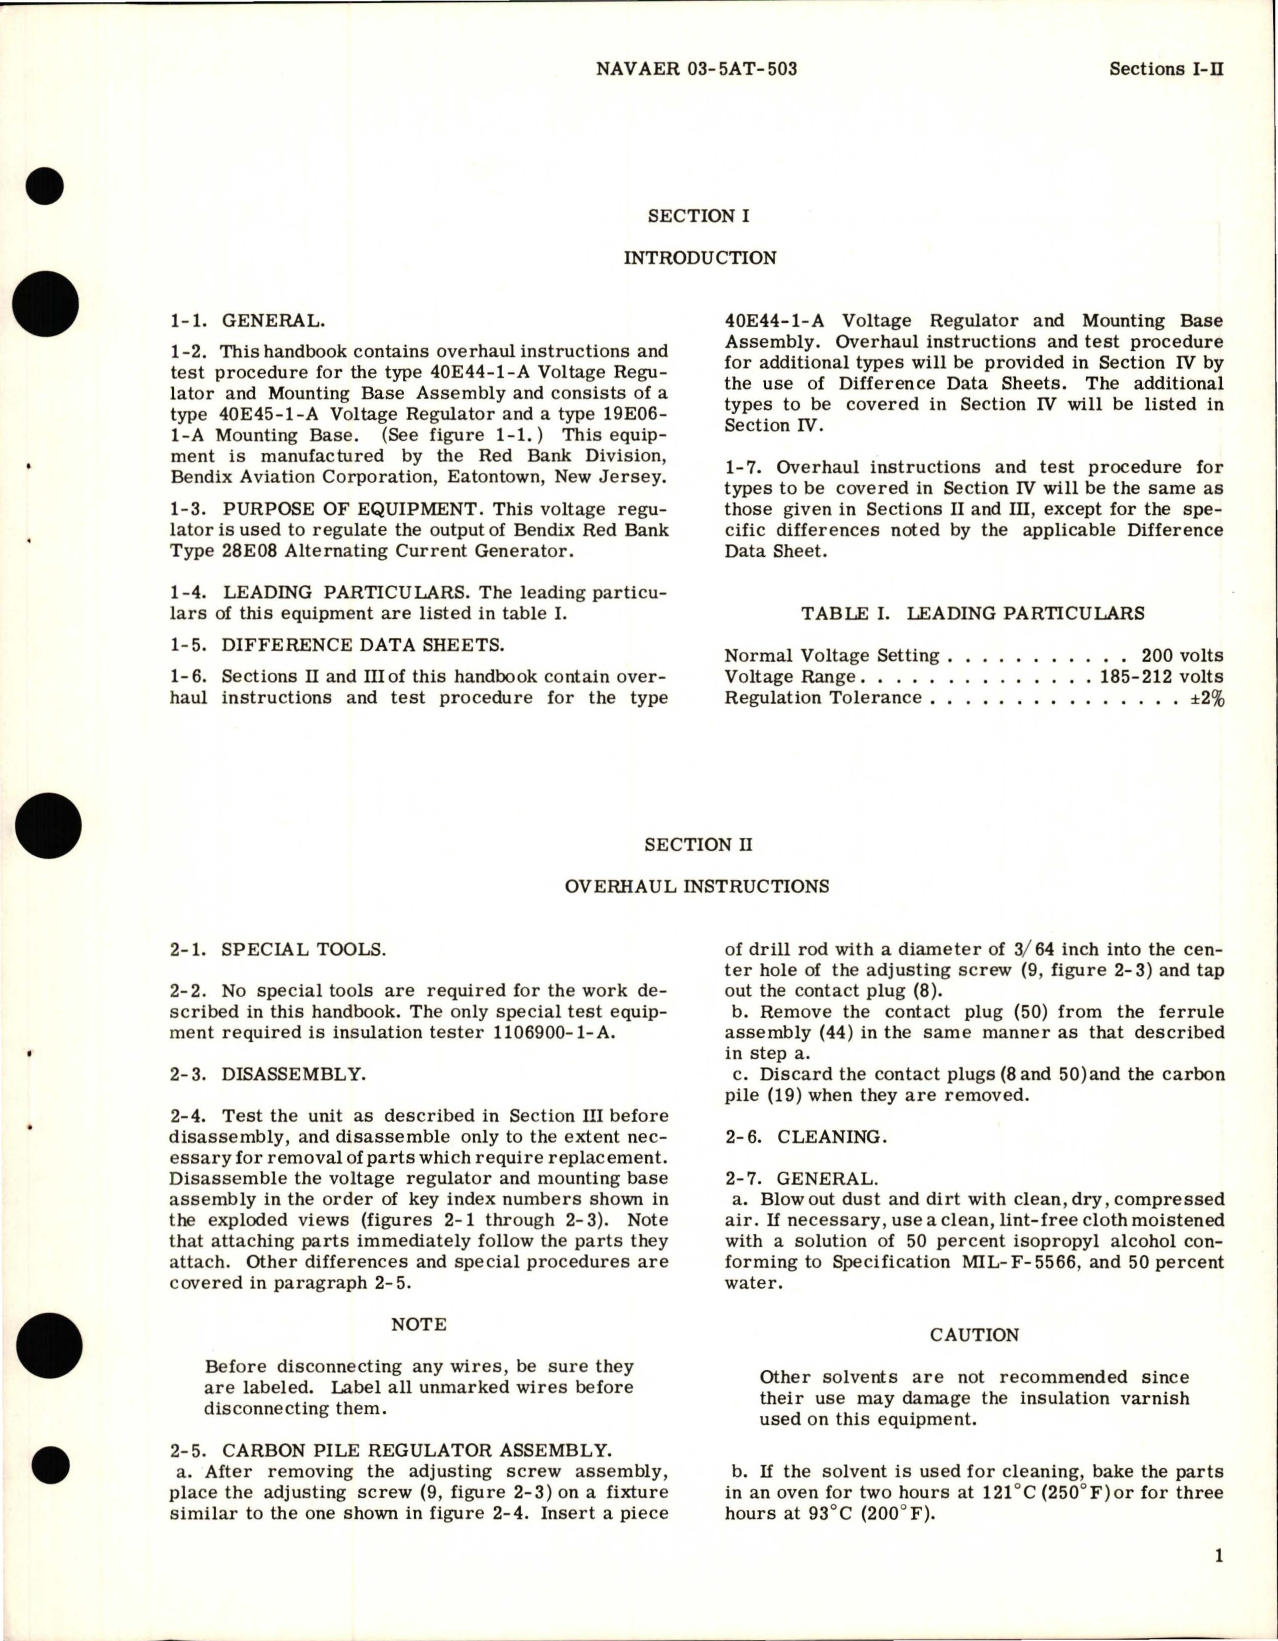 Sample page 5 from AirCorps Library document: Overhaul Instructions for Voltage Regulator and Mounting Base Assembly - Type 40E44-1-A 